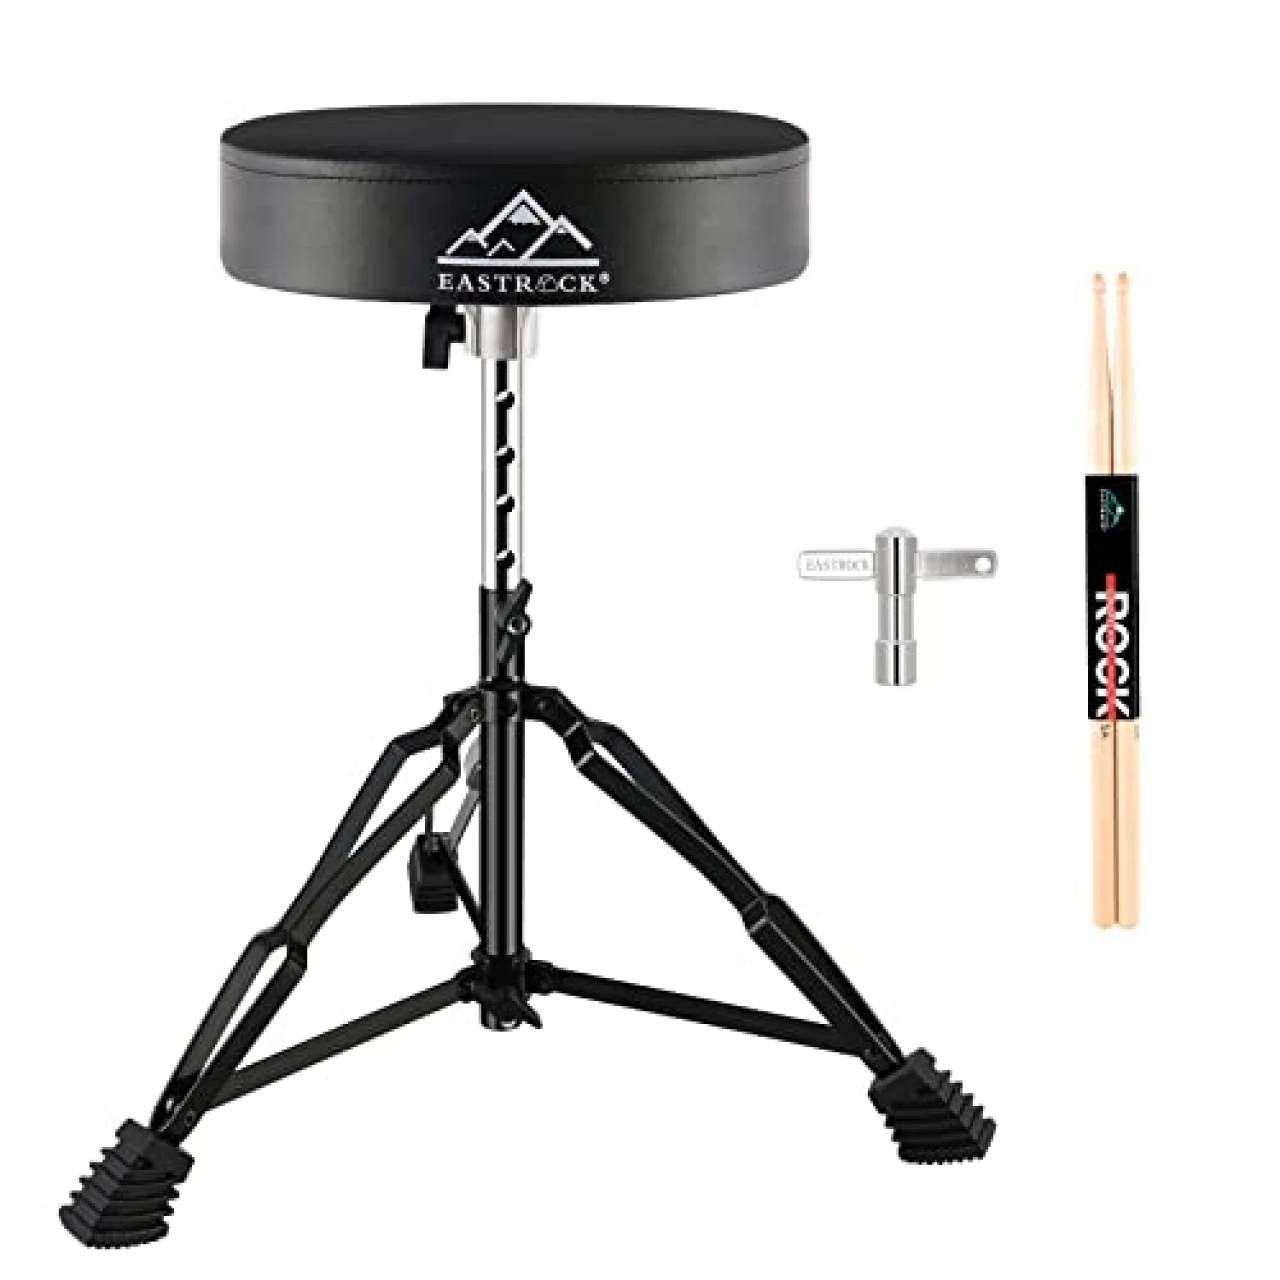 EASTROCK Drum Throne,Padded Drum Seat Drumming Stools with Anti-Slip Feet for Adults and Kids Drummers (Dark Black)